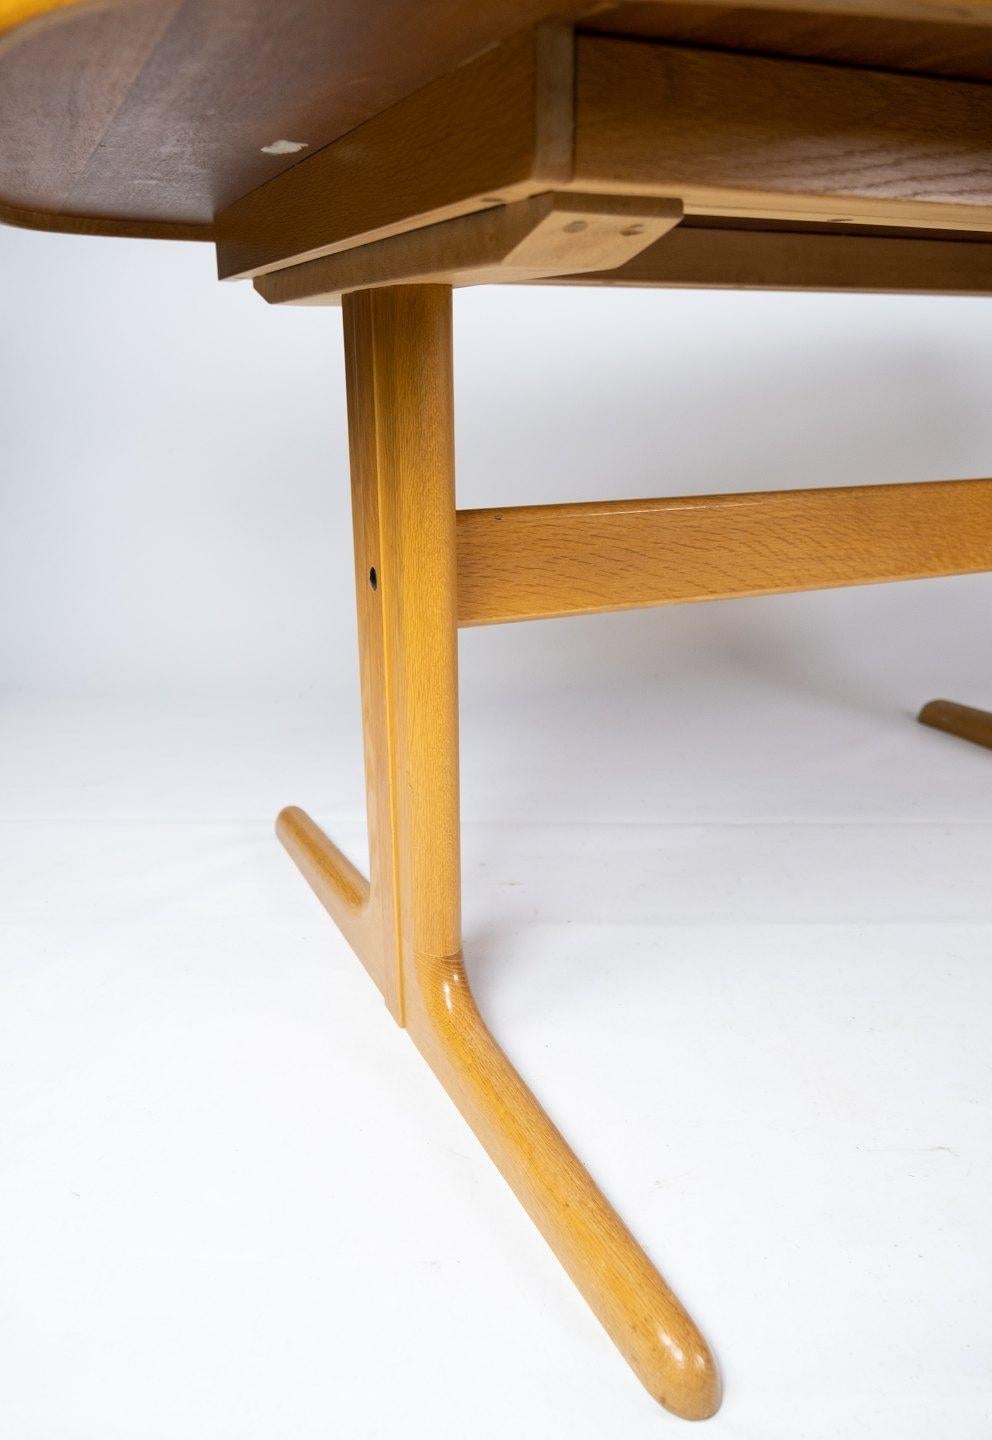 Mid-20th Century Dining Table in Oak of Danish Design Manufactured by Skovby Furniture Factory For Sale